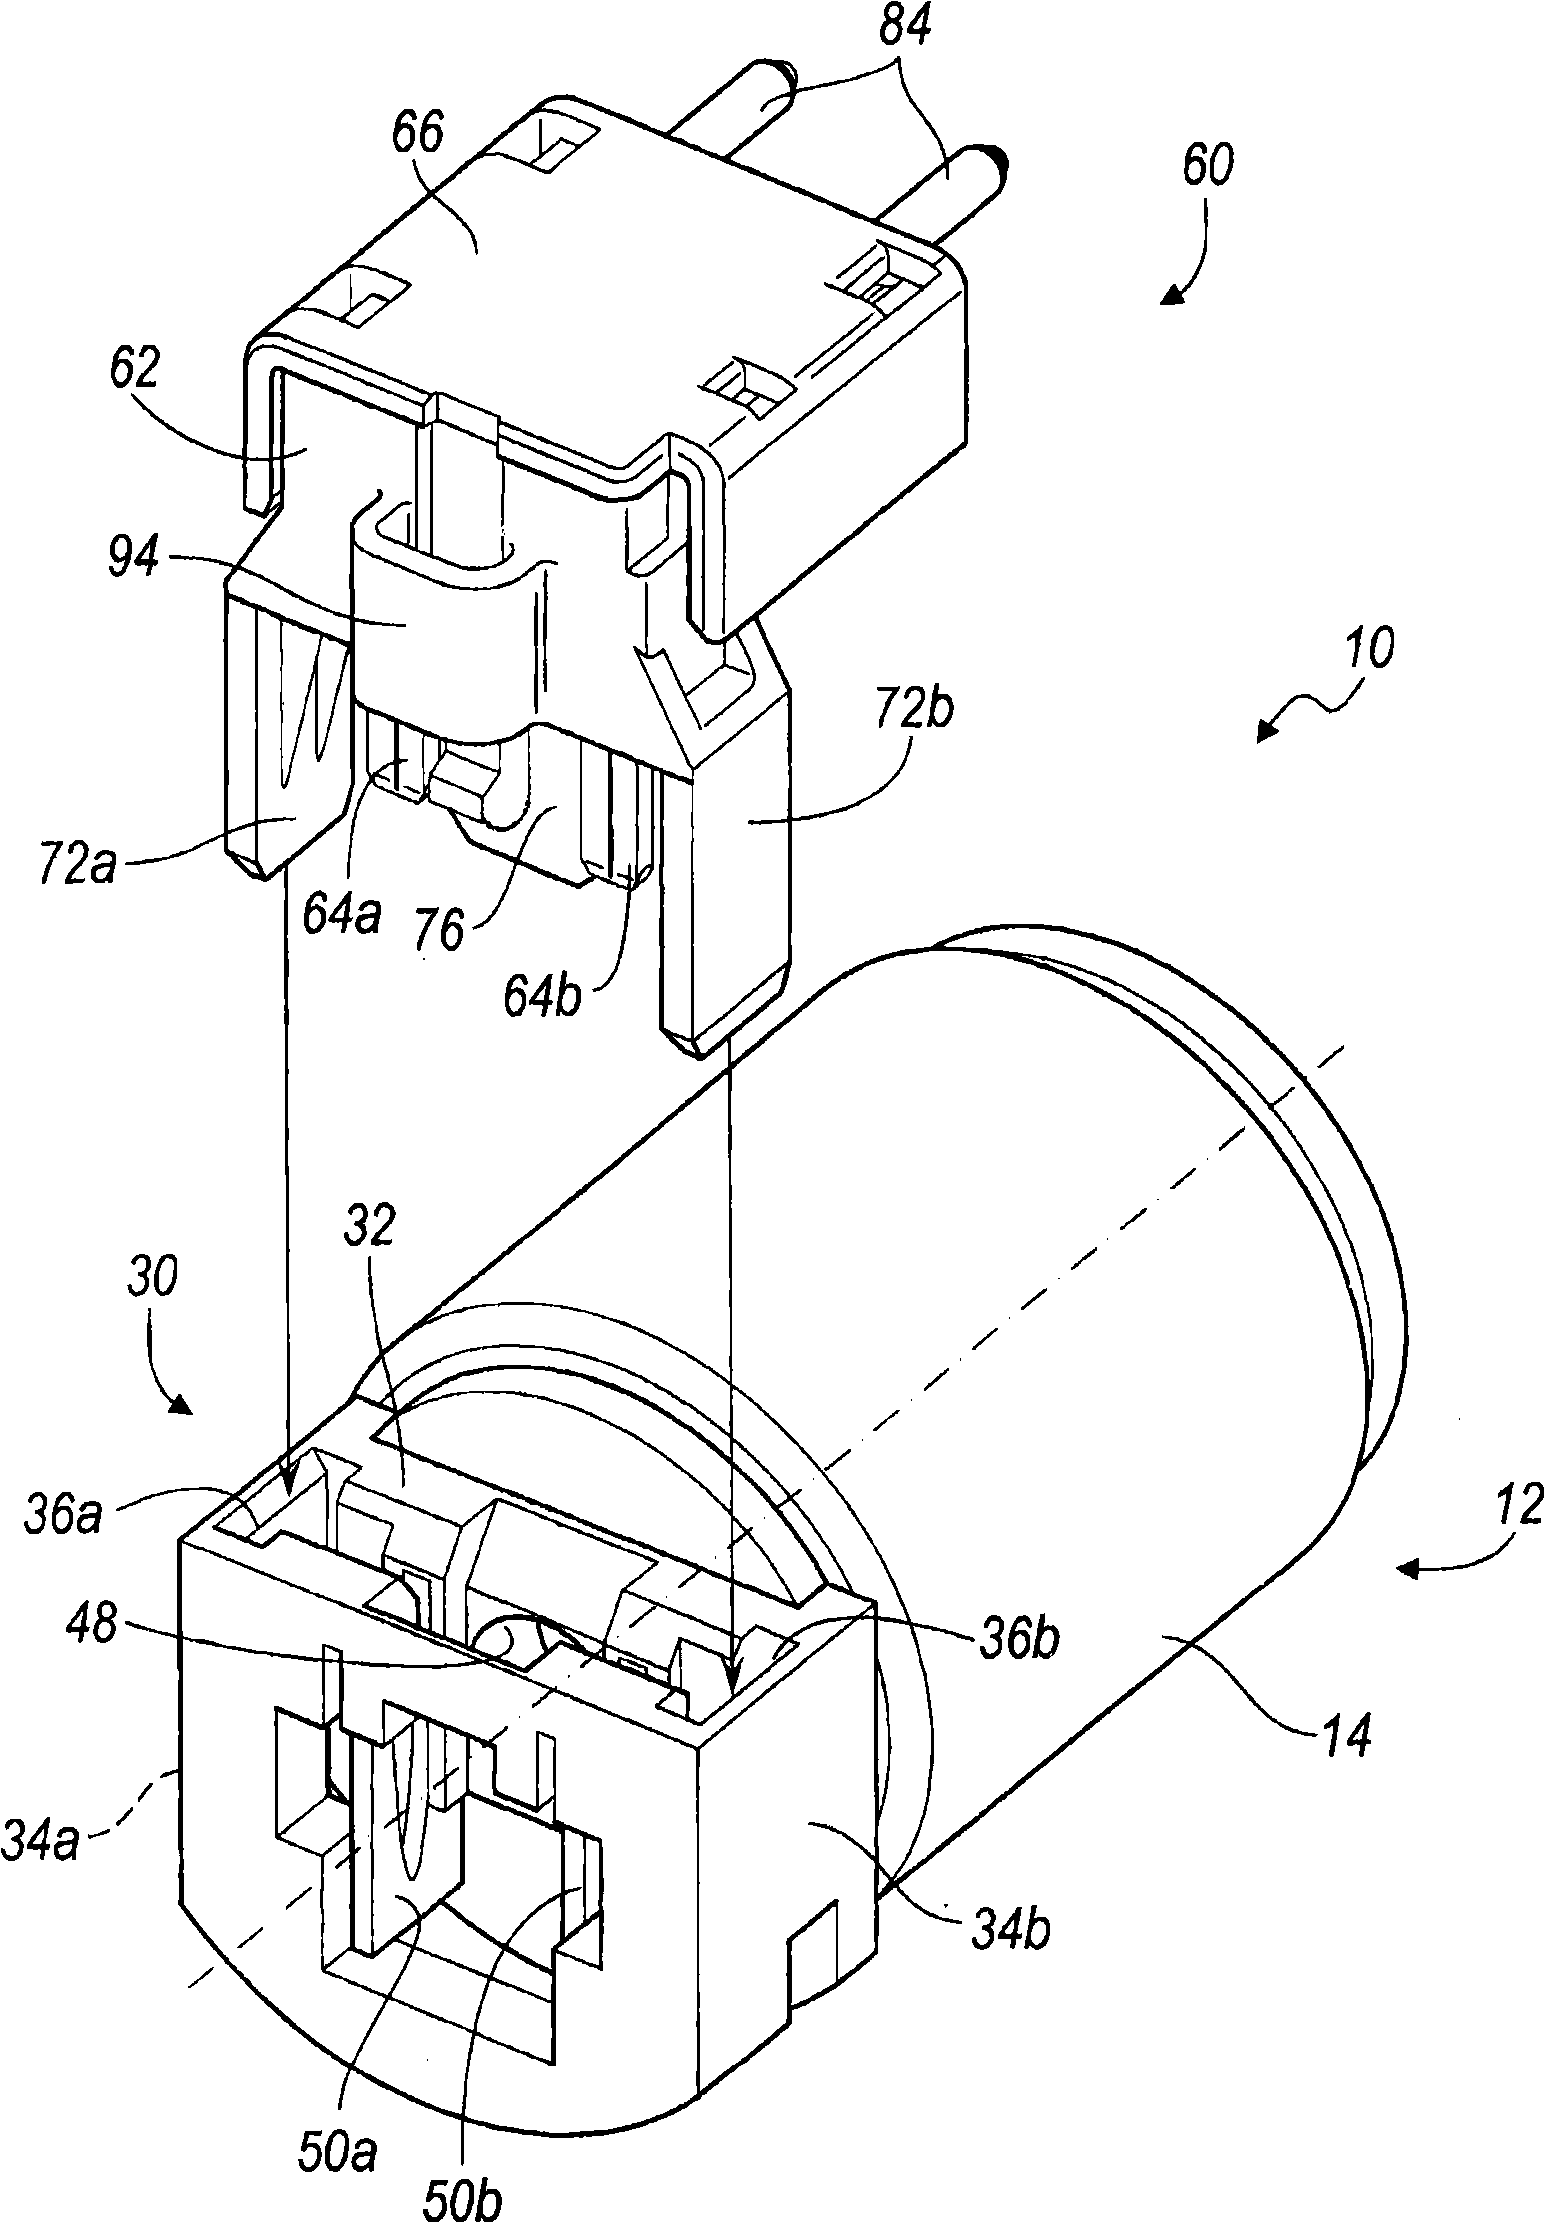 Solenoid and connector assembly